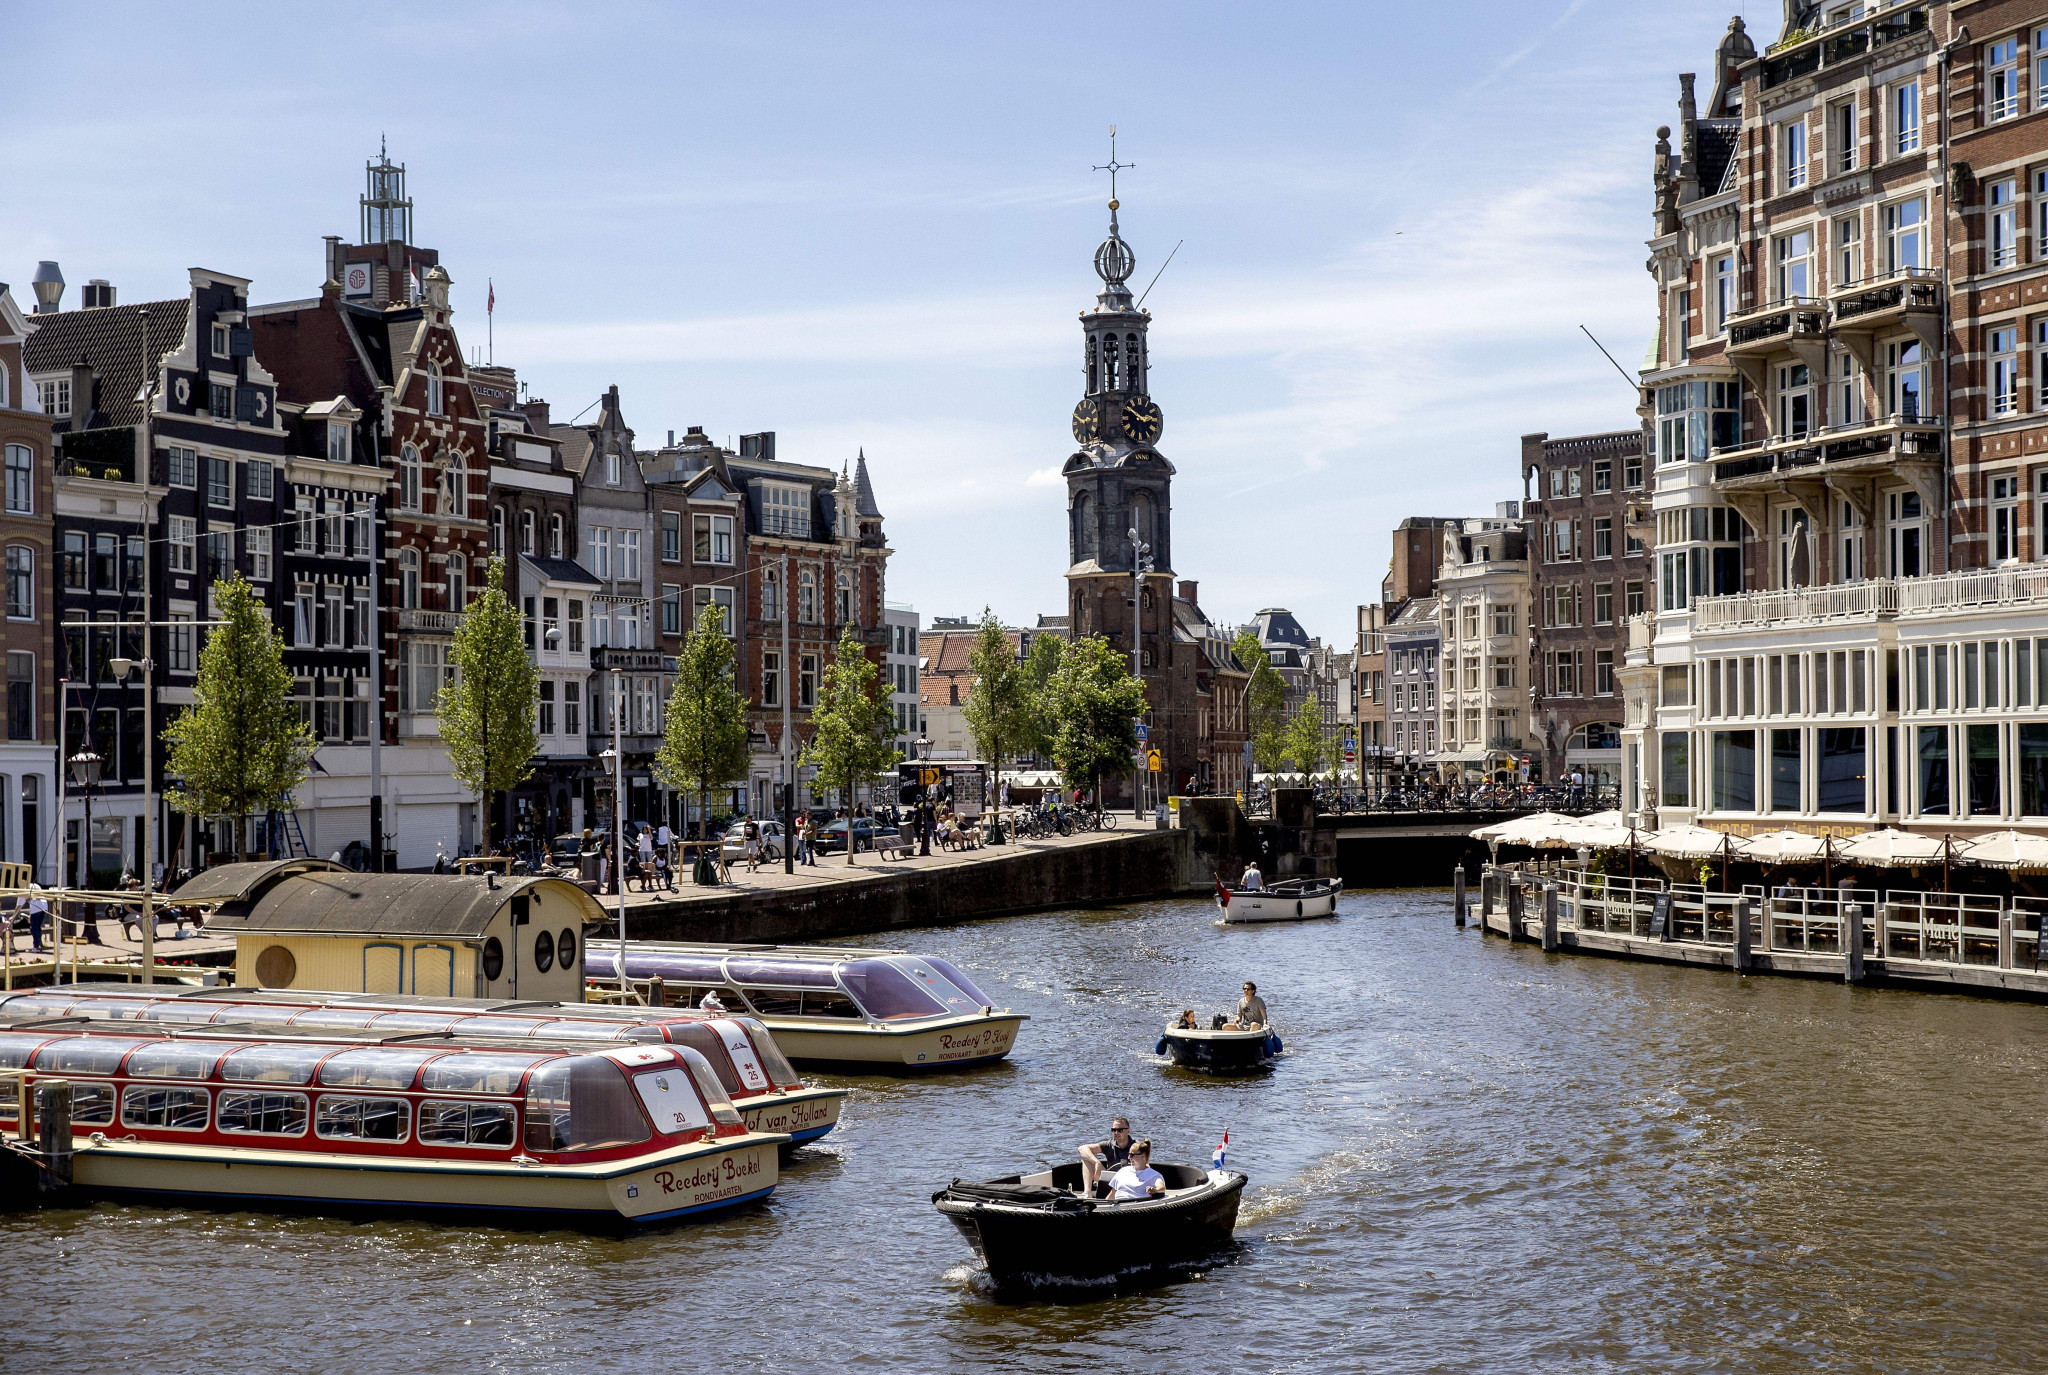 Amsterdam is due to stage the GAMMA World Congress and World Championships ©Getty Images